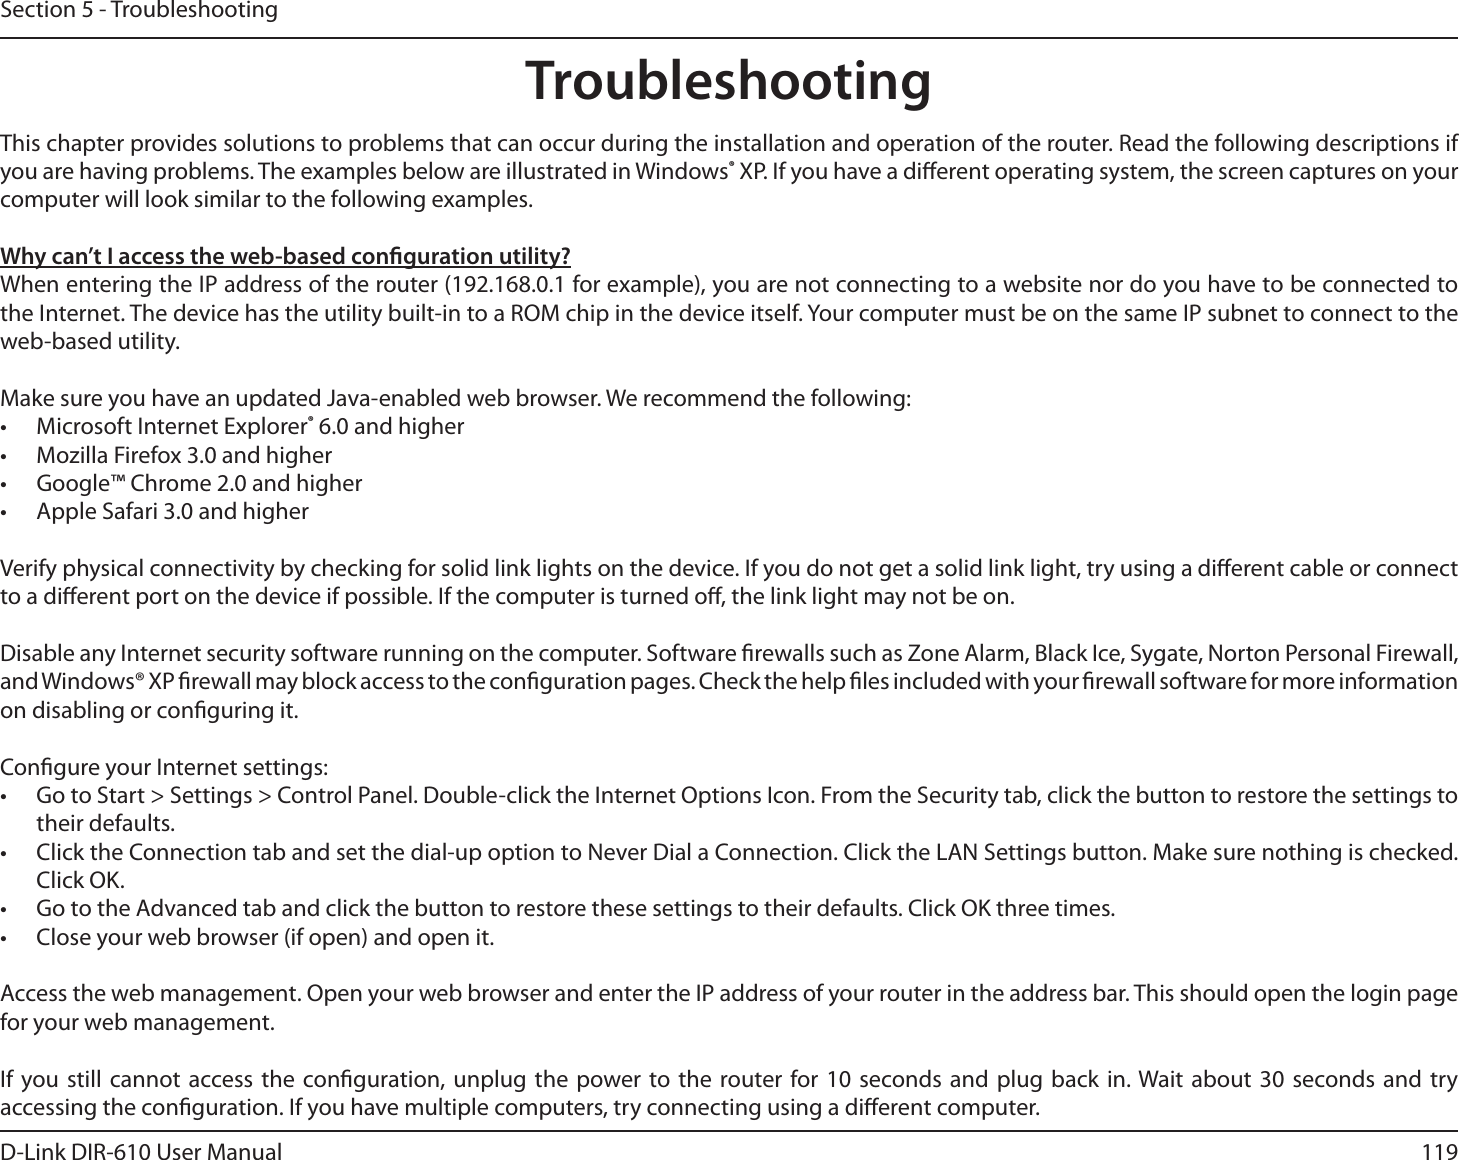 119D-Link DIR-610 User ManualSection 5 - TroubleshootingTroubleshootingThis chapter provides solutions to problems that can occur during the installation and operation of the router. Read the following descriptions if you are having problems. The examples below are illustrated in Windows® XP. If you have a dierent operating system, the screen captures on your computer will look similar to the following examples.Why can’t I access the web-based conguration utility?When entering the IP address of the router (192.168.0.1 for example), you are not connecting to a website nor do you have to be connected to the Internet. The device has the utility built-in to a ROM chip in the device itself. Your computer must be on the same IP subnet to connect to the web-based utility.Make sure you have an updated Java-enabled web browser. We recommend the following:•  Microsoft Internet Explorer® 6.0 and higher•  Mozilla Firefox 3.0 and higher•  Google™ Chrome 2.0 and higher•  Apple Safari 3.0 and higherVerify physical connectivity by checking for solid link lights on the device. If you do not get a solid link light, try using a dierent cable or connect to a dierent port on the device if possible. If the computer is turned o, the link light may not be on.Disable any Internet security software running on the computer. Software rewalls such as Zone Alarm, Black Ice, Sygate, Norton Personal Firewall, and Windows® XP rewall may block access to the conguration pages. Check the help les included with your rewall software for more information on disabling or conguring it.Congure your Internet settings:•  Go to Start &gt; Settings &gt; Control Panel. Double-click the Internet Options Icon. From the Security tab, click the button to restore the settings to their defaults.•  Click the Connection tab and set the dial-up option to Never Dial a Connection. Click the LAN Settings button. Make sure nothing is checked. Click OK.•  Go to the Advanced tab and click the button to restore these settings to their defaults. Click OK three times.•  Close your web browser (if open) and open it.Access the web management. Open your web browser and enter the IP address of your router in the address bar. This should open the login page for your web management.If you still cannot access the conguration, unplug the power to the router for 10 seconds and plug back in. Wait about 30 seconds and try accessing the conguration. If you have multiple computers, try connecting using a dierent computer.